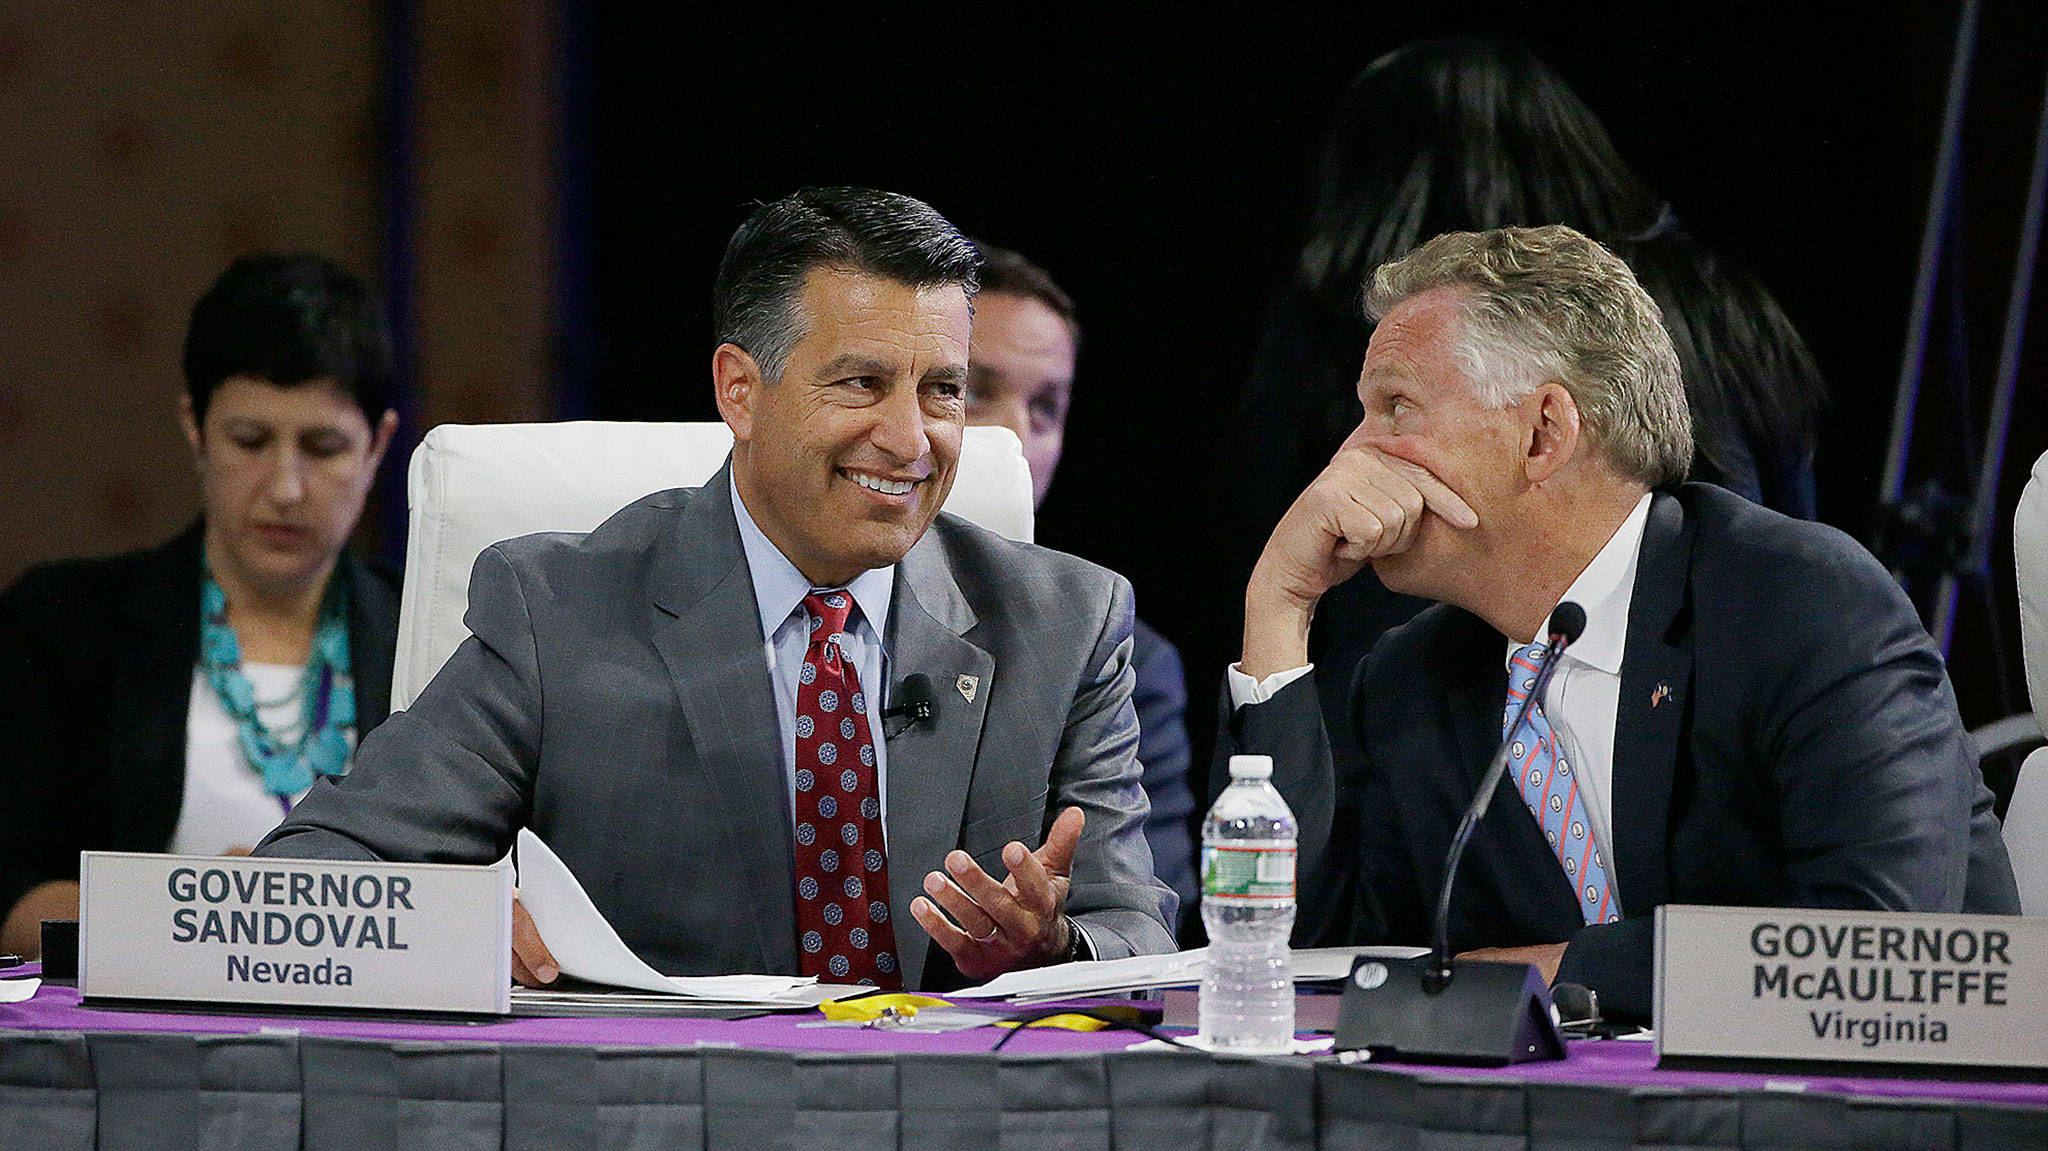 Nevada Republican Gov. Brian Sandoval (left), and Virginia Democratic Gov. Terence McAuliffe talk on the third day of the National Governors Association’s meeting Saturday in Providence, Rhode Island. (AP Photo/Stephan Savoia)